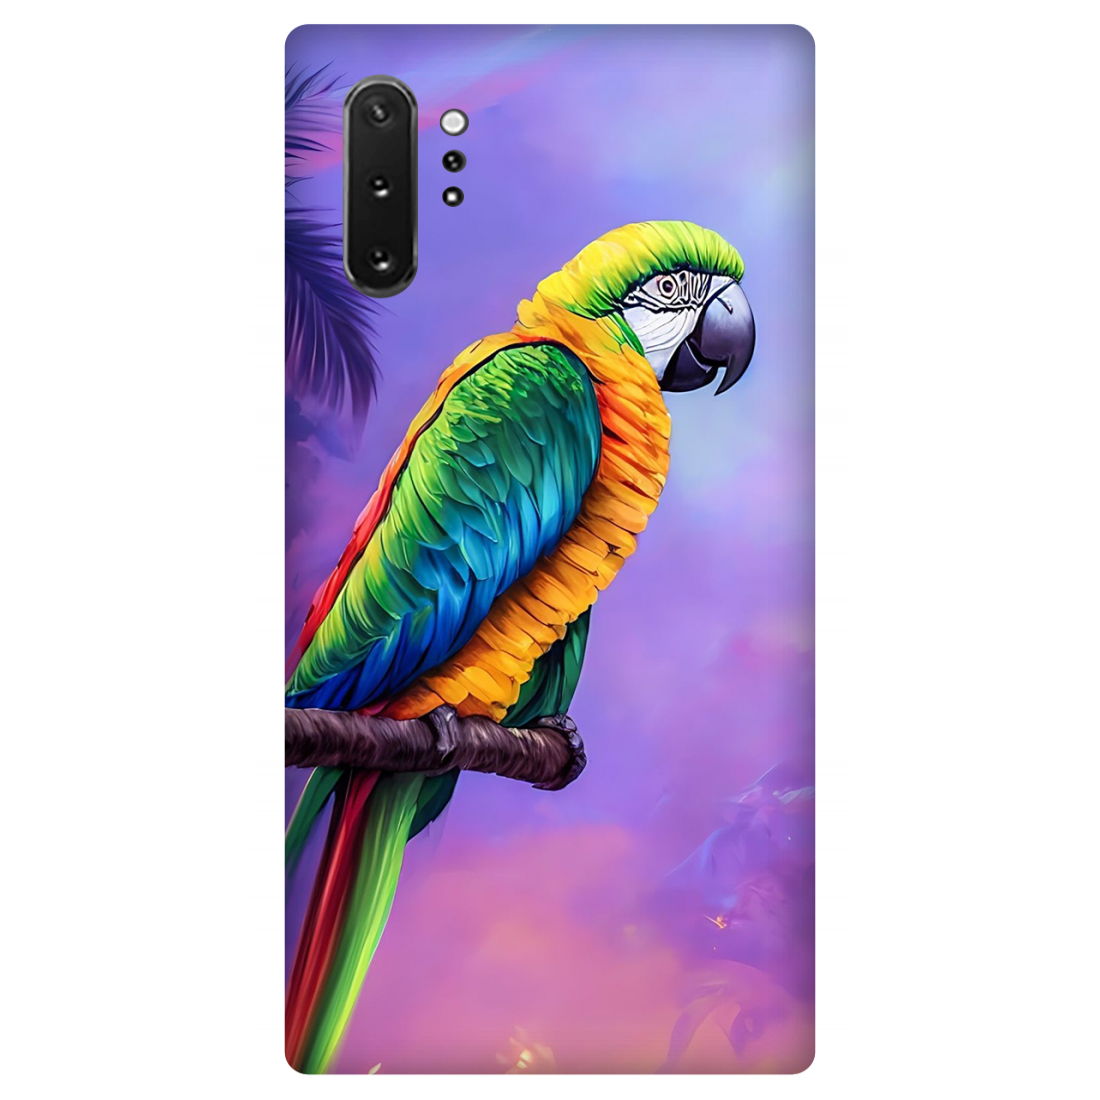 Vibrant Parrot in an Ethereal Atmosphere Case Samsung Galaxy Note 10 Plus